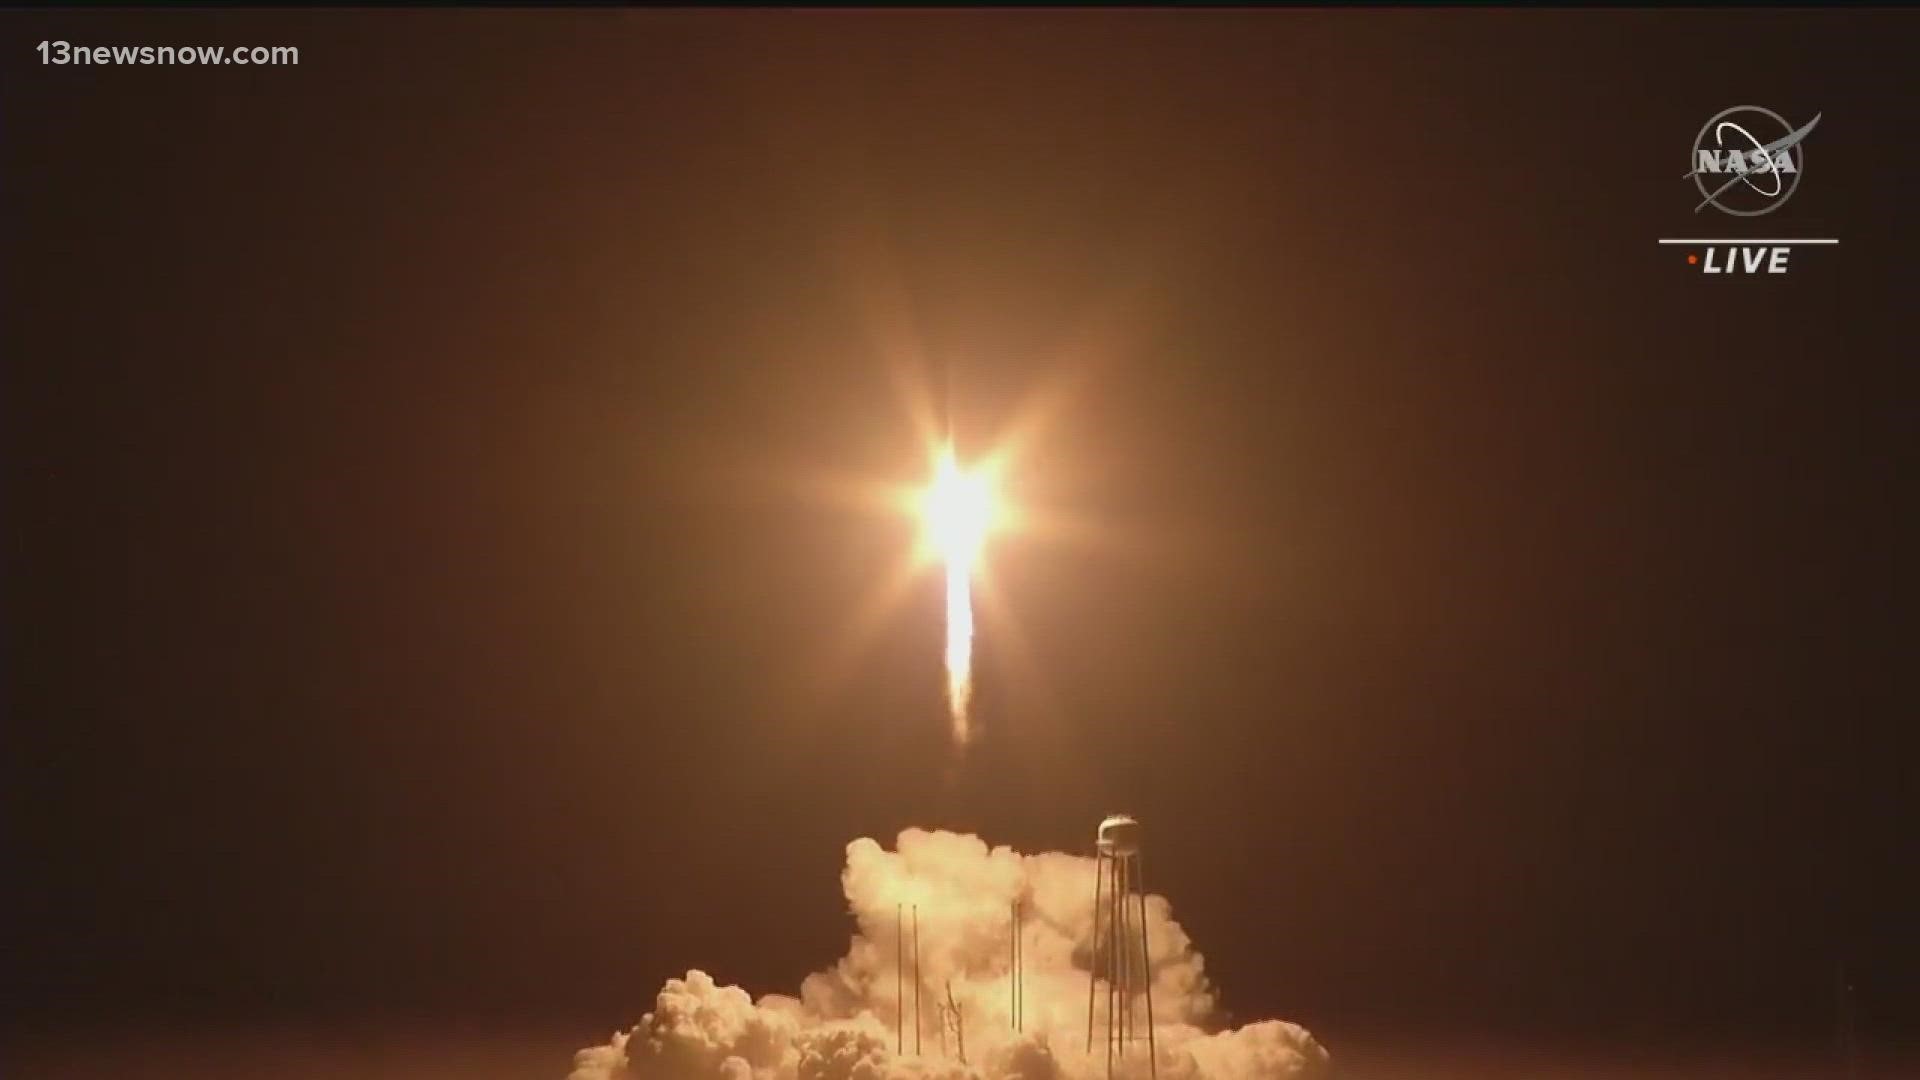 There are two more rocket launches scheduled for the rest of 2022.